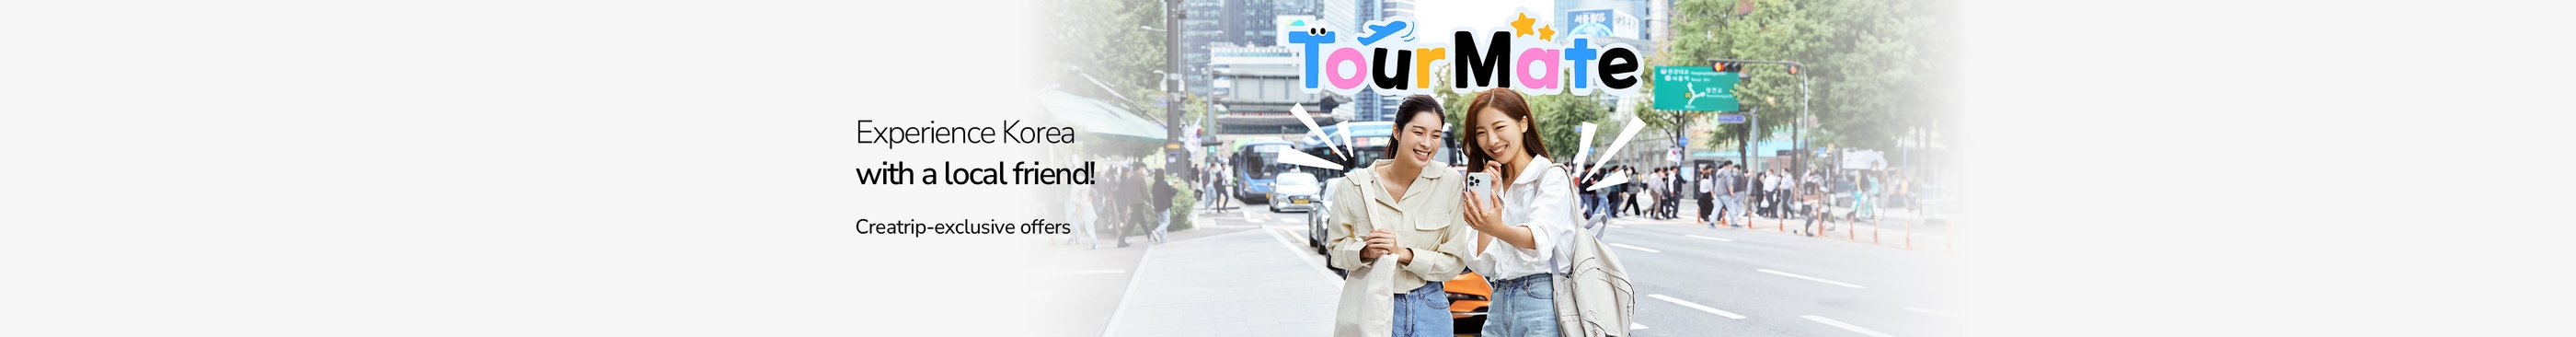 (Creatrip-exclusive) Tour Mate: Your Gateway to Authentic Korea, with a Companion